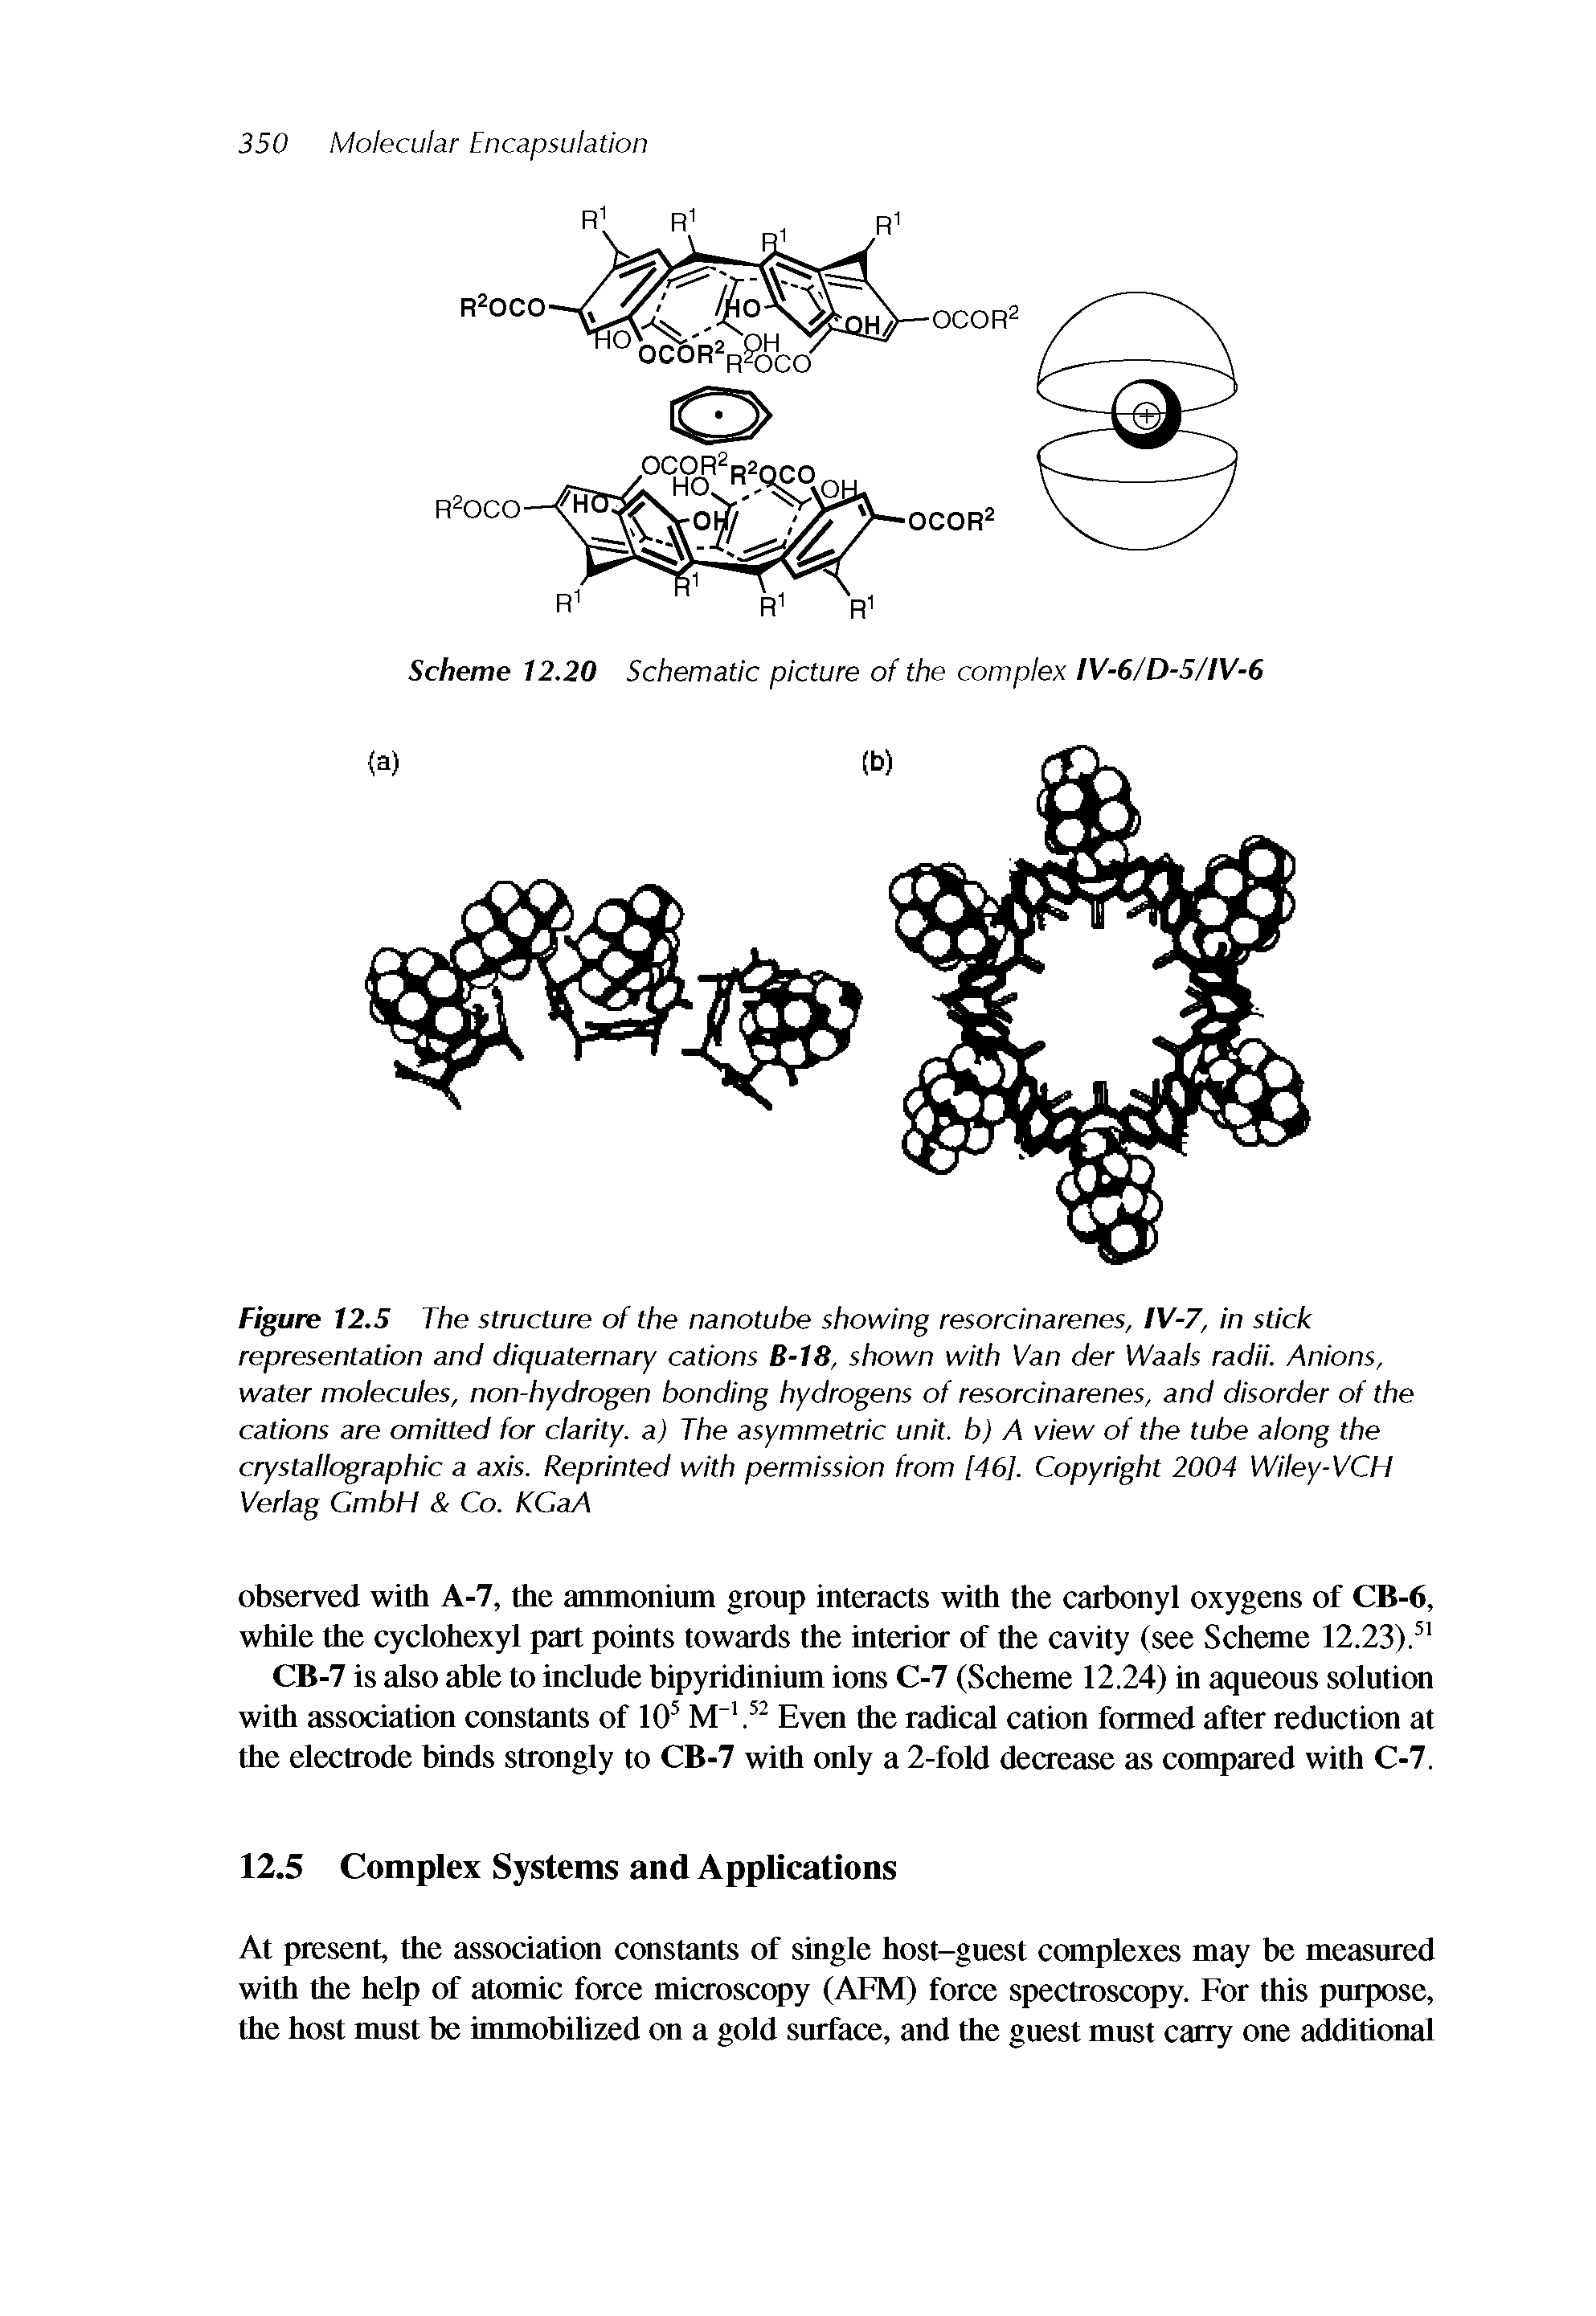 Figure 12.5 The structure of the nanotube showing resorcinarenes, tV-7, in stick representation and diquaternary cations B-18, shown with Van der Waals radii. Anions, water molecules, non-hydrogen bonding hydrogens of resorcinarenes, and disorder of the cations are omitted for clarity, a) The asymmetric unit, b) A view of the tube along the crystallographic a axis. Reprinted with permission from [46]. Copyright 2004 Wiley-VCH Verlag CmbH Co. KCaA...